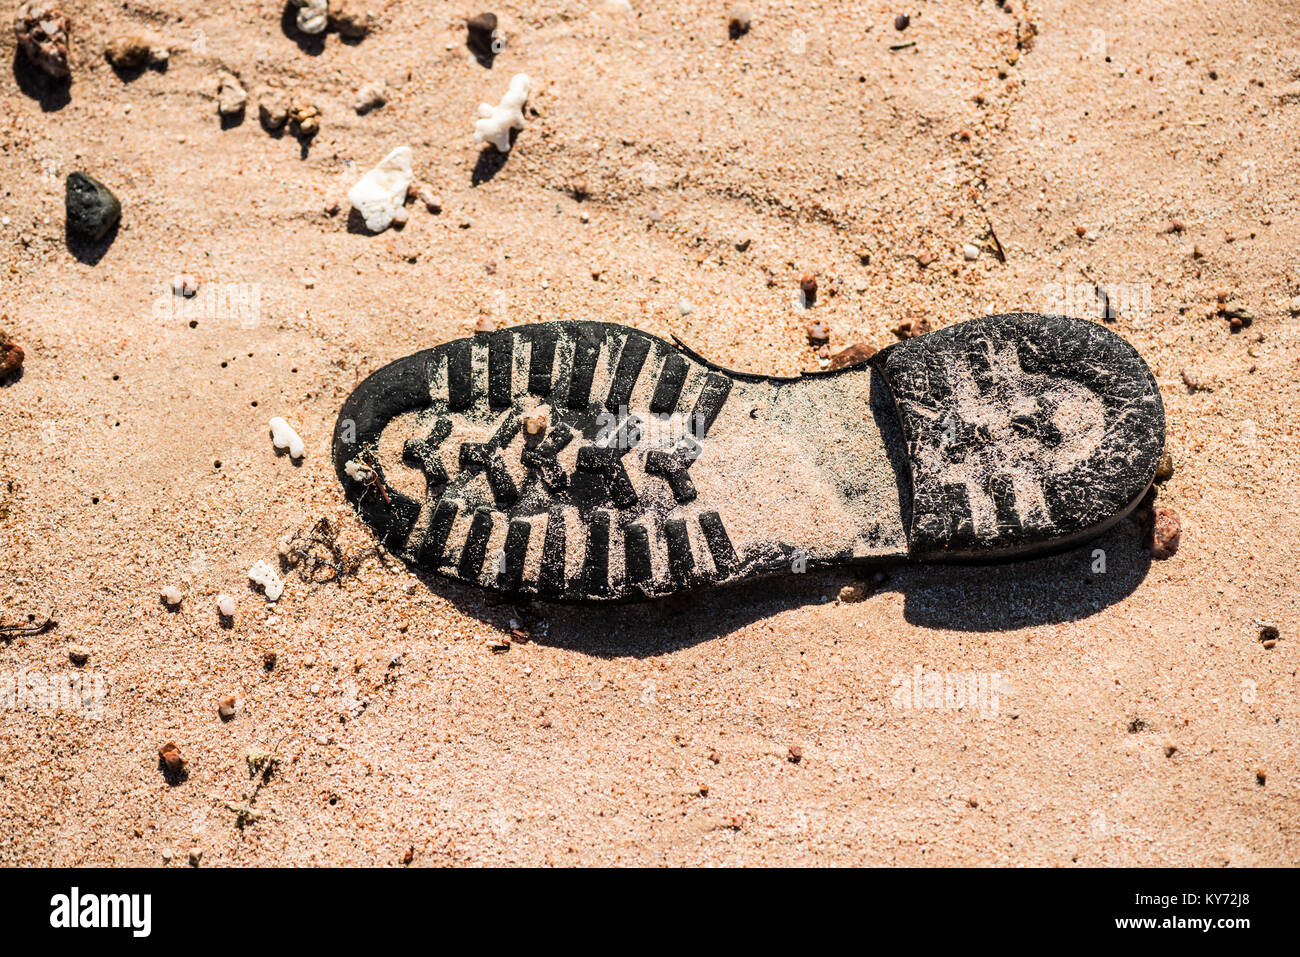 Old shoe sole on the sand in desert Stock Photo - Alamy